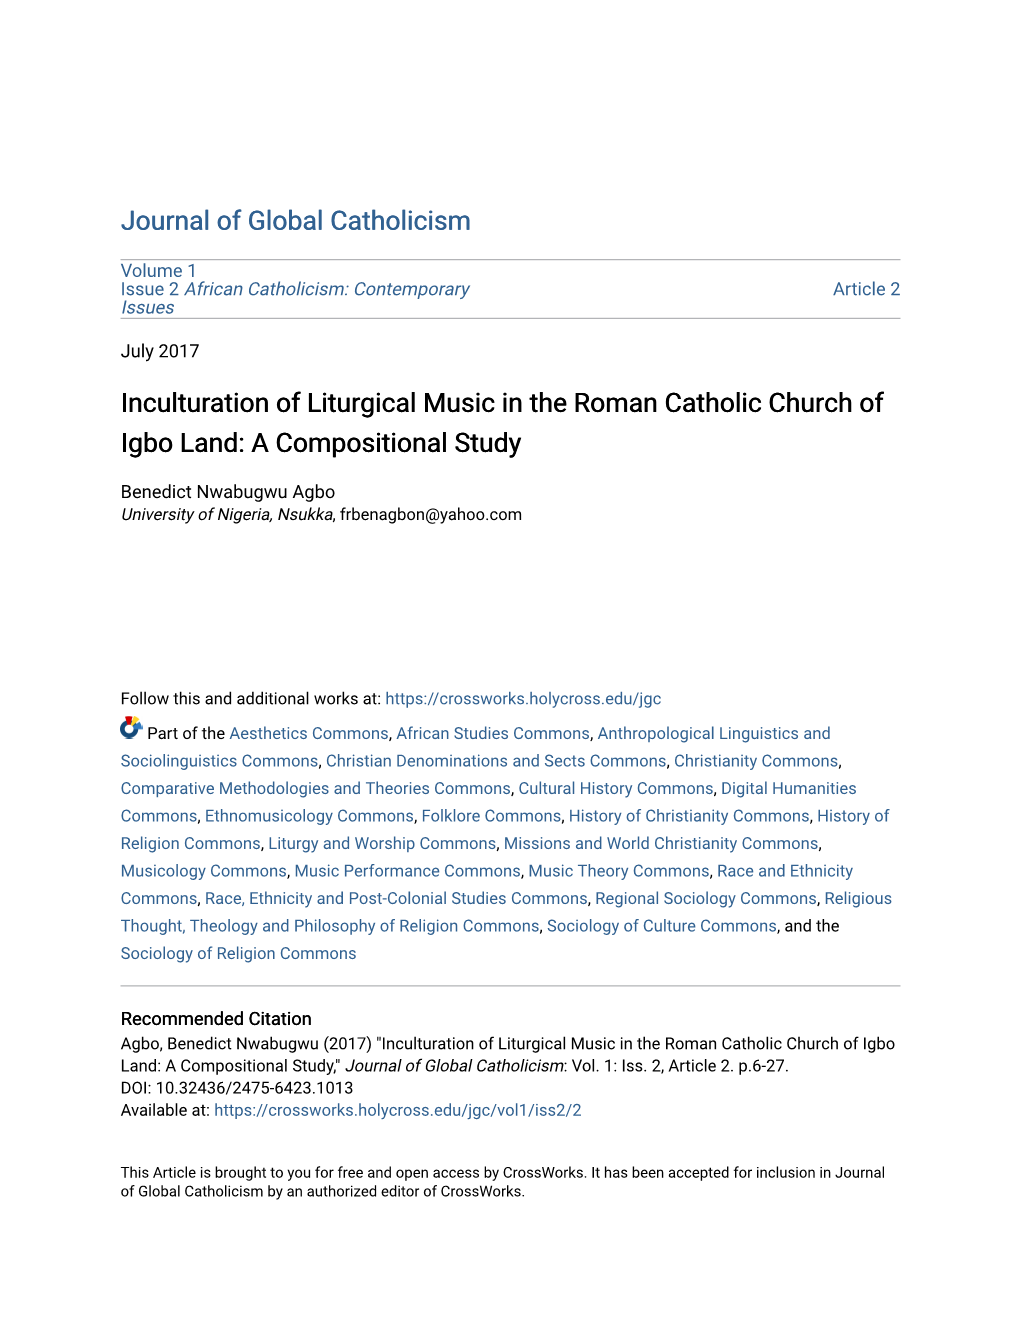 Inculturation of Liturgical Music in the Roman Catholic Church of Igbo Land: a Compositional Study